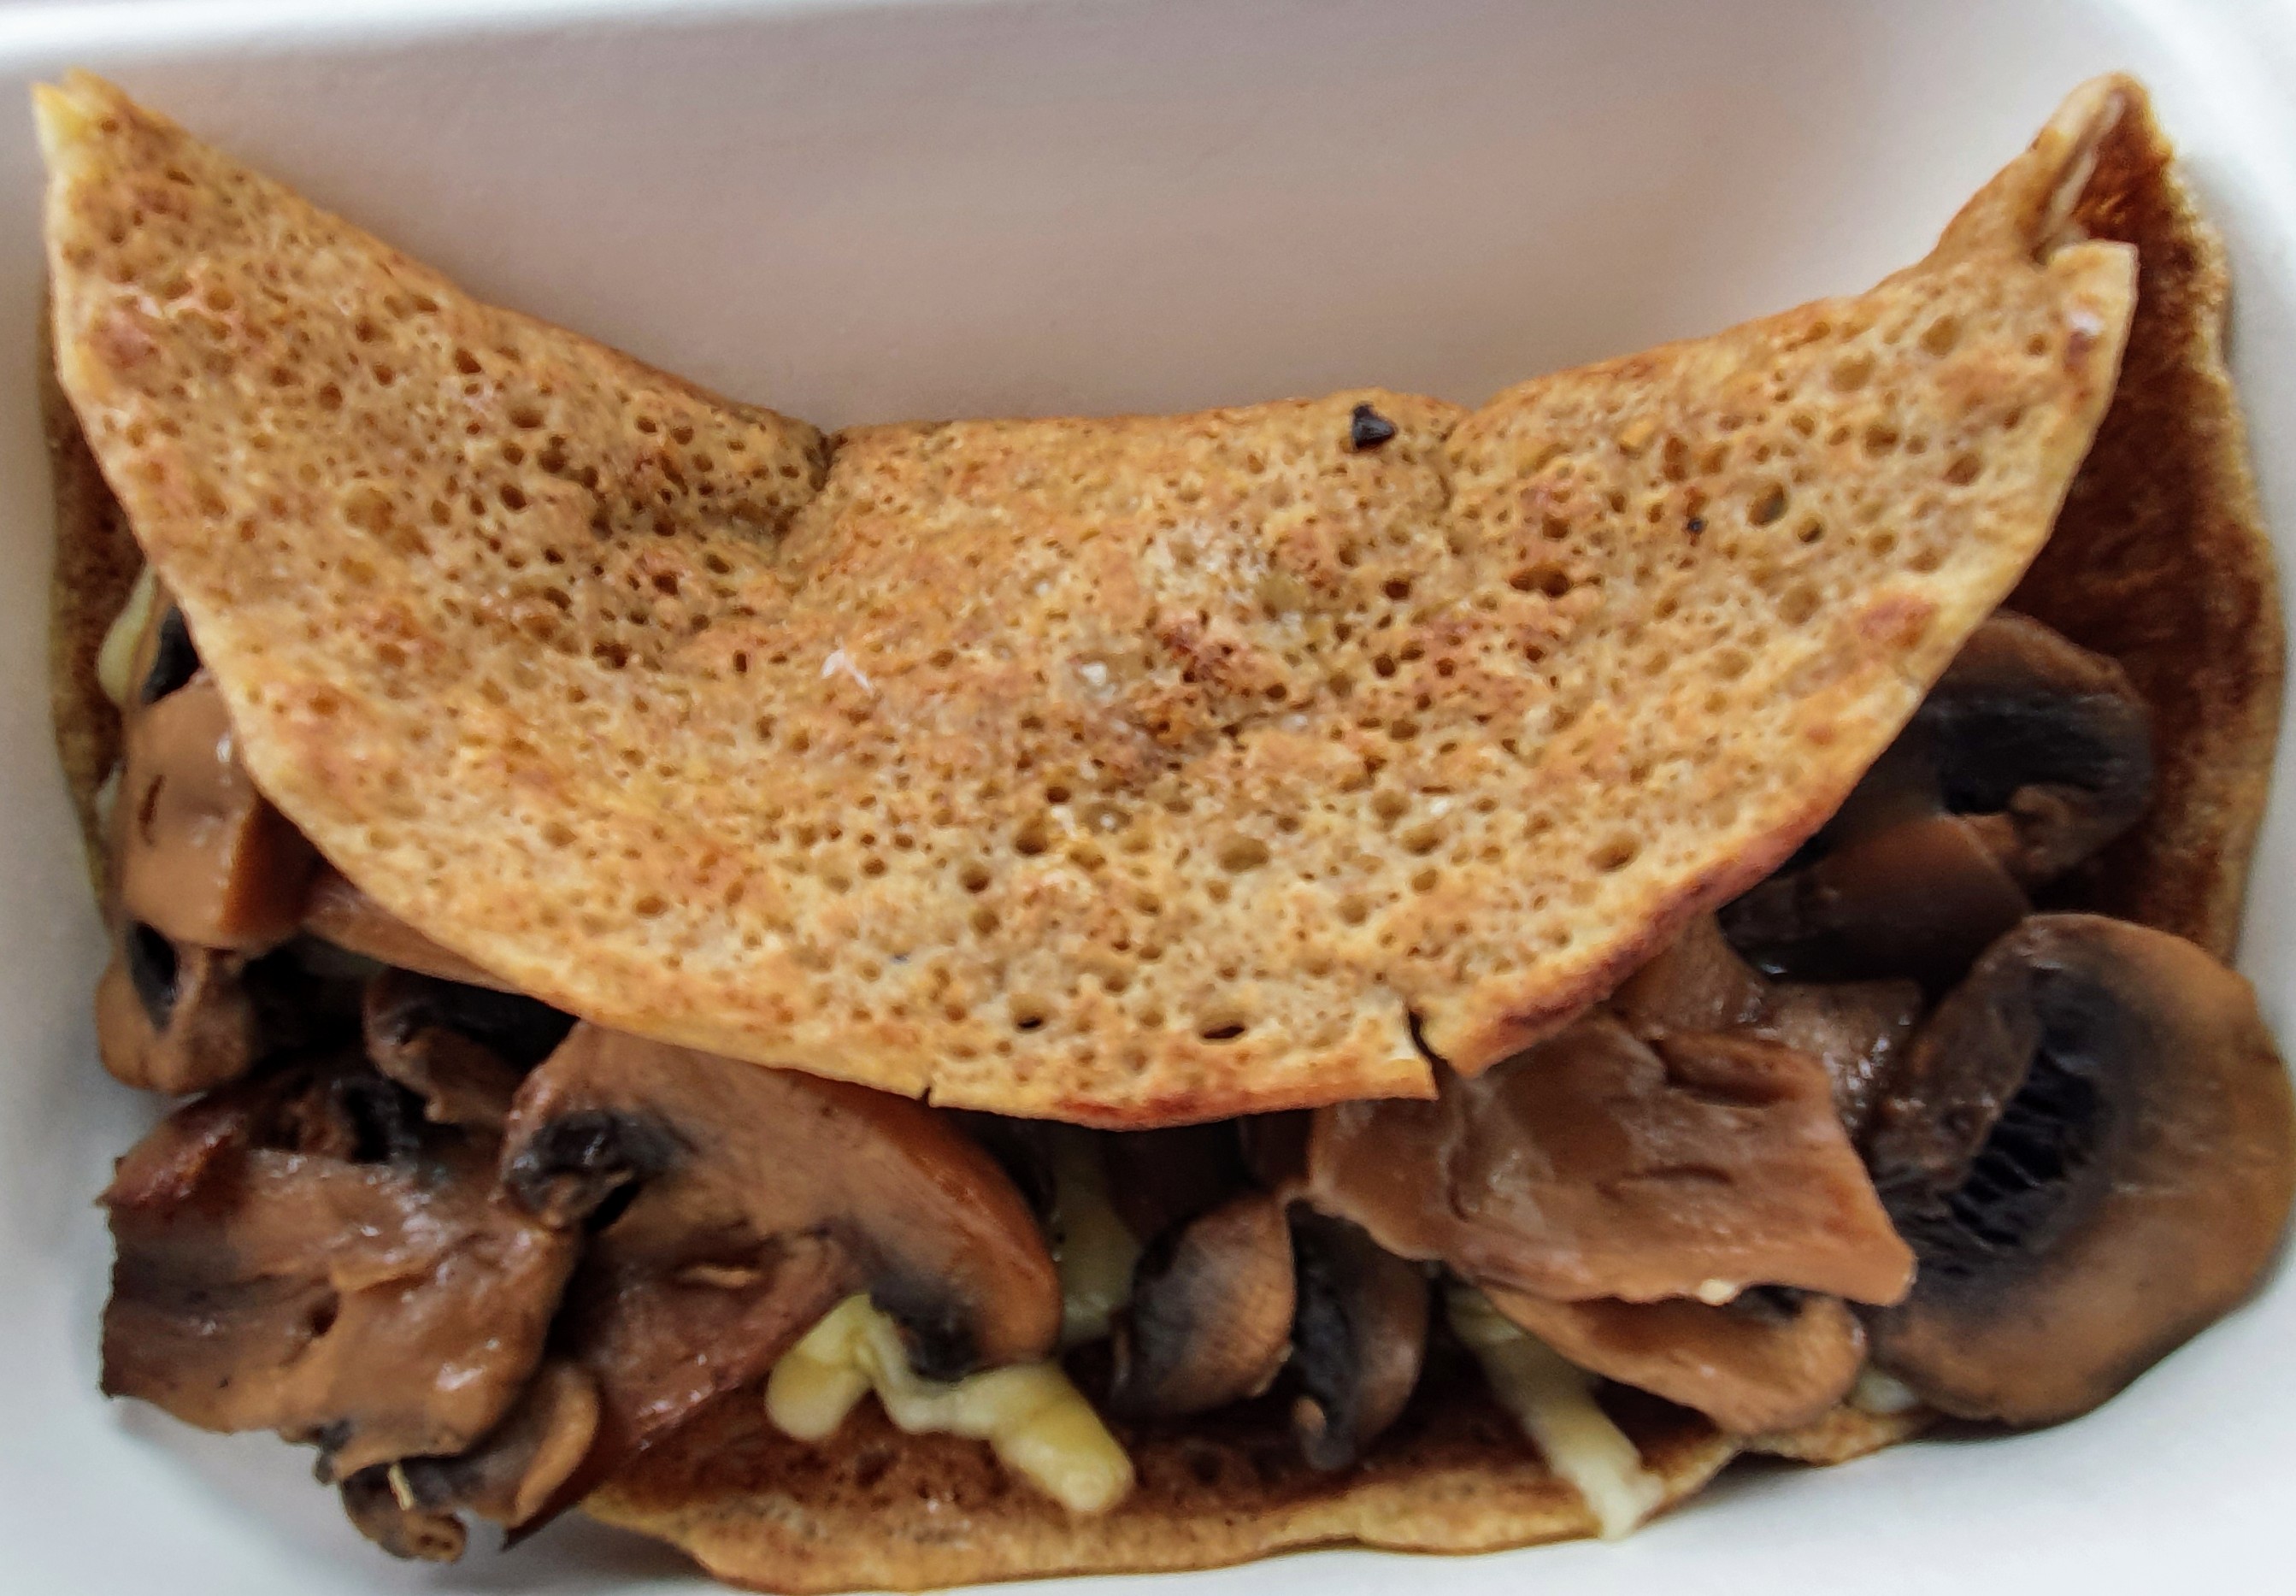 Staffordshire oatcake with melted cheese and mushrooms, Dolly Birds Mobile Catering